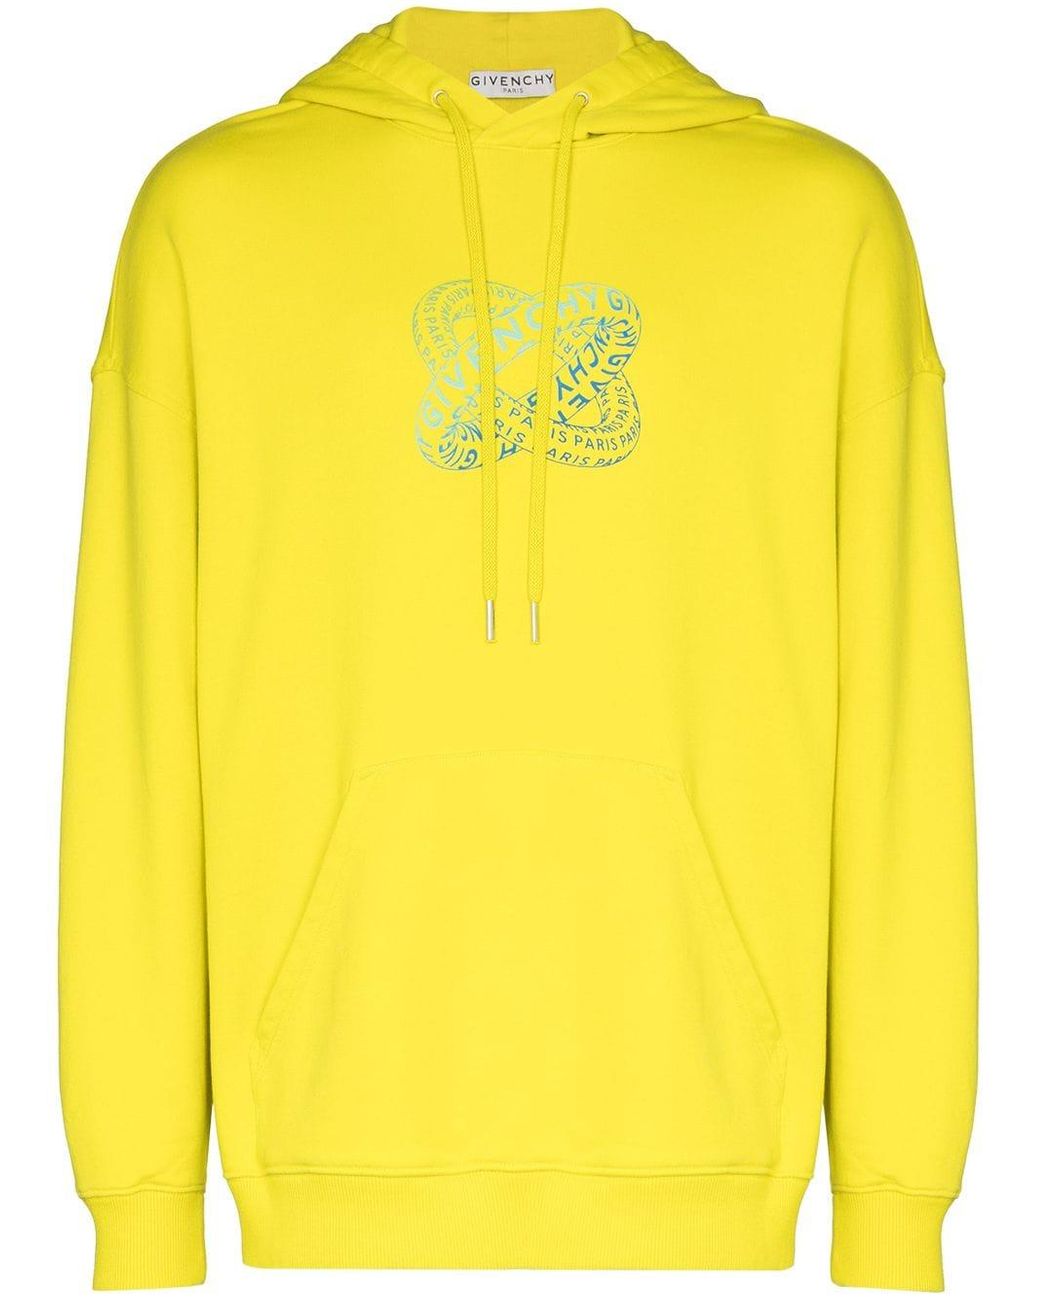 Givenchy Cotton Logo Hoodie in Yellow for Men - Save 2% - Lyst